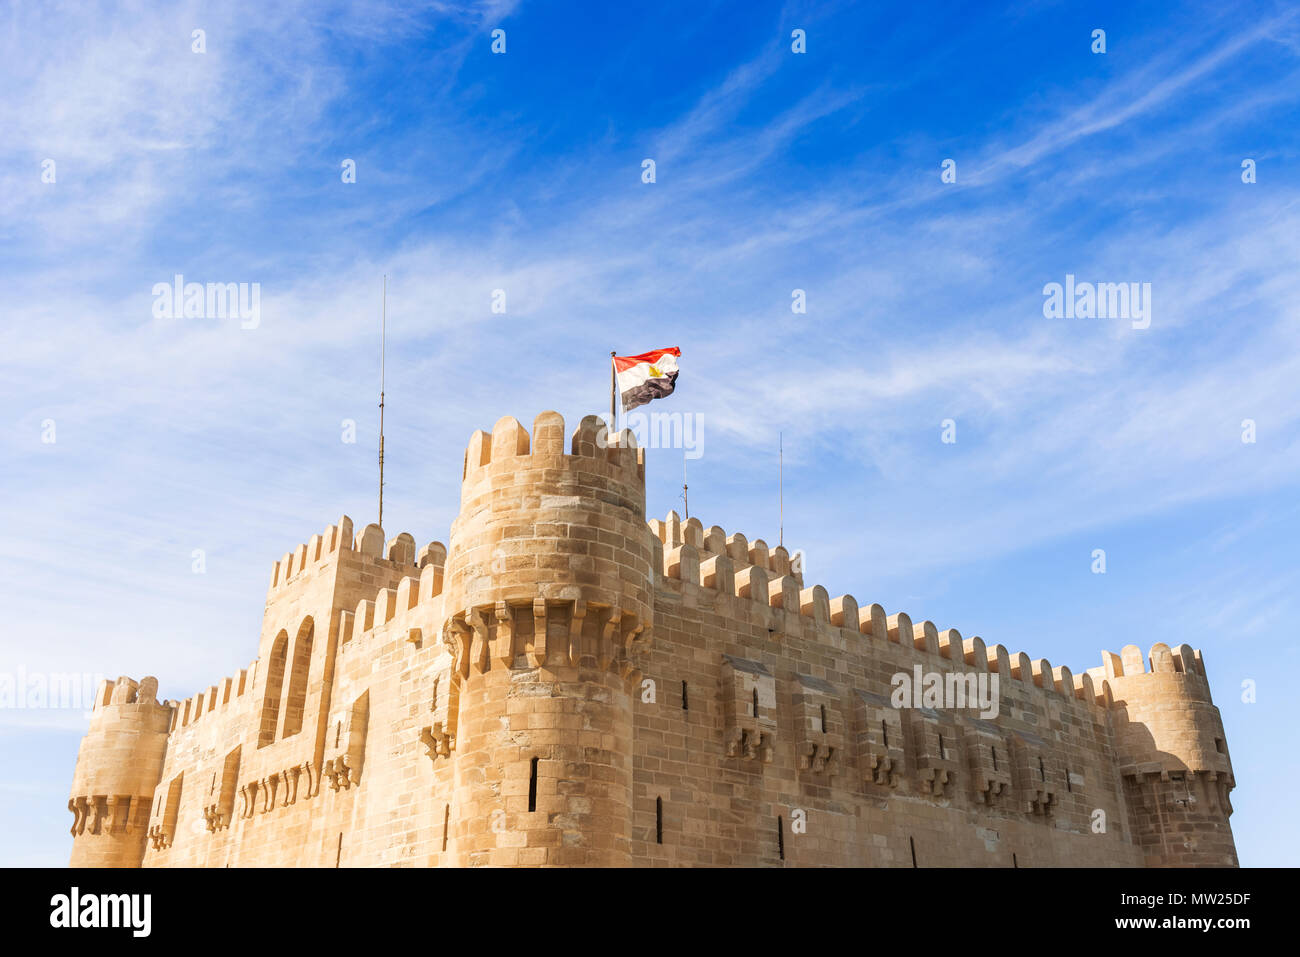 Photo of Qaitbay Castle or Citadel with Egyptian flag in Alexandria, Egypt. The Citadel of Qaitbay is a 15th-century defensive fortress on the Mediter Stock Photo